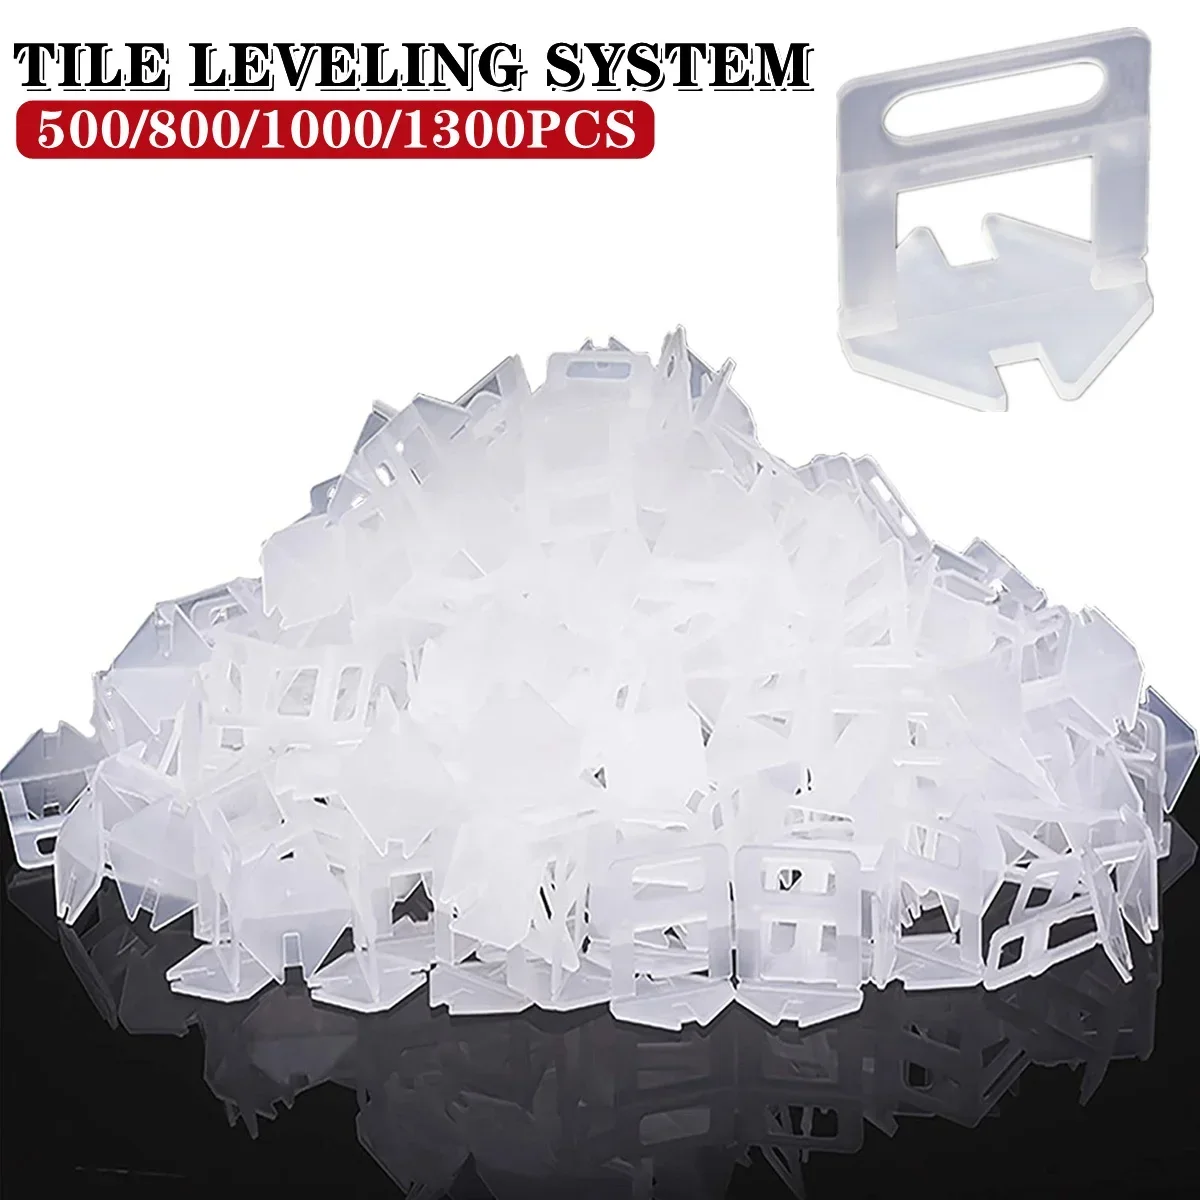 Tile Leveling System Clips 500-1300Pcs Tile Spacers 1MM-3MM for Ceramic Wall Tile Laying Construction Tools  Leveler Spacers 126pcs level wedges tile spacers for flooring wall tile spacer tile leveling system leveler locator spacers plier